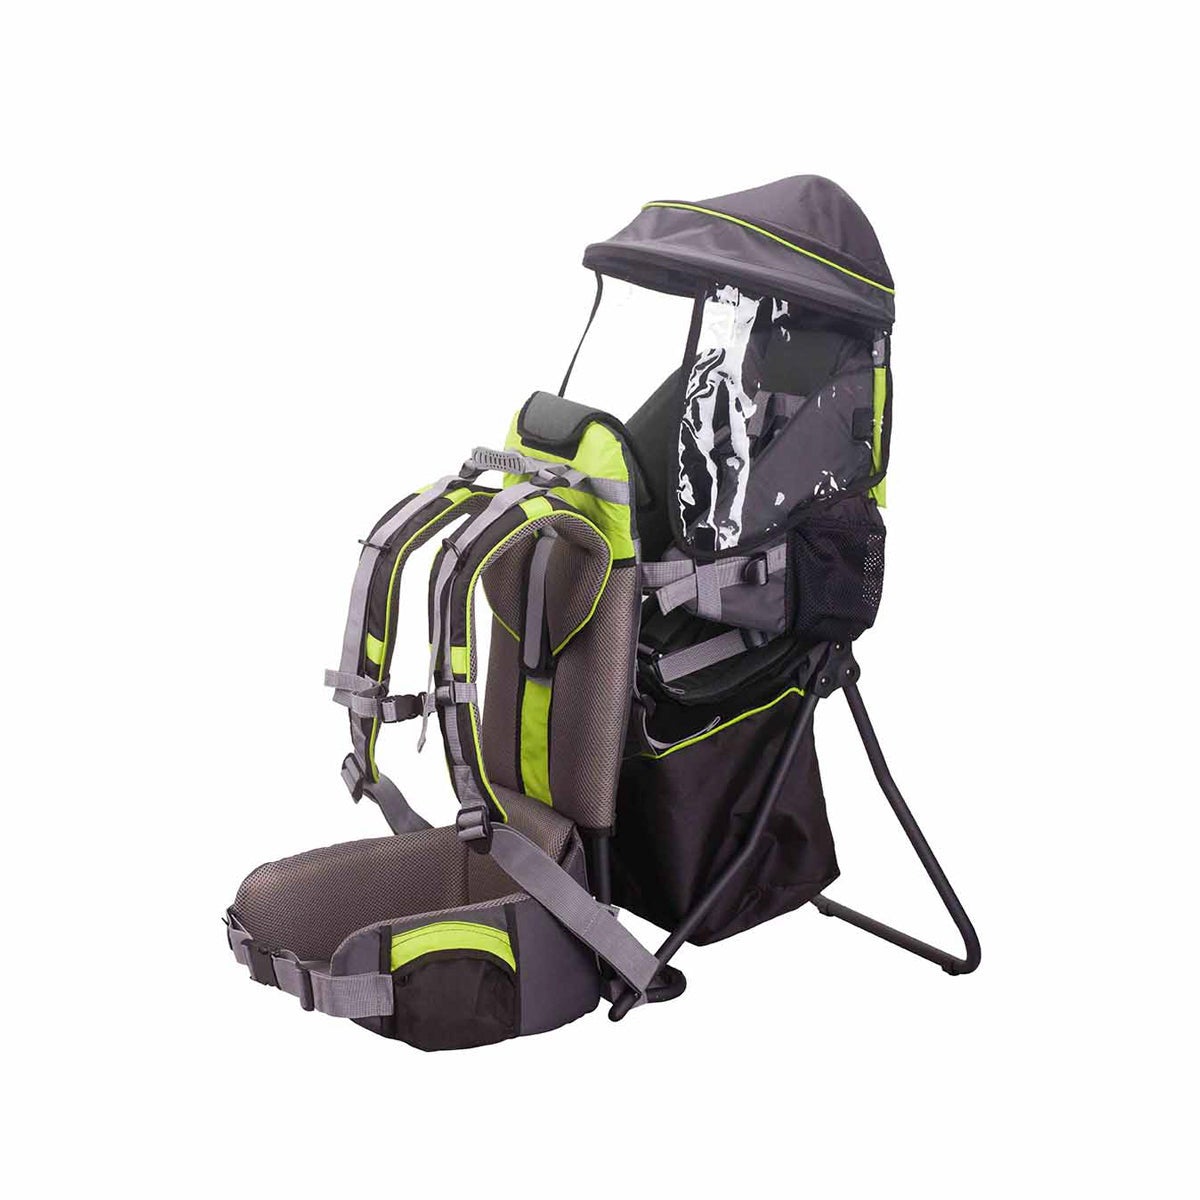 Baby Backpack Hiking Child Carrier Lightweight Hiking Camping Child Carrier Backpack